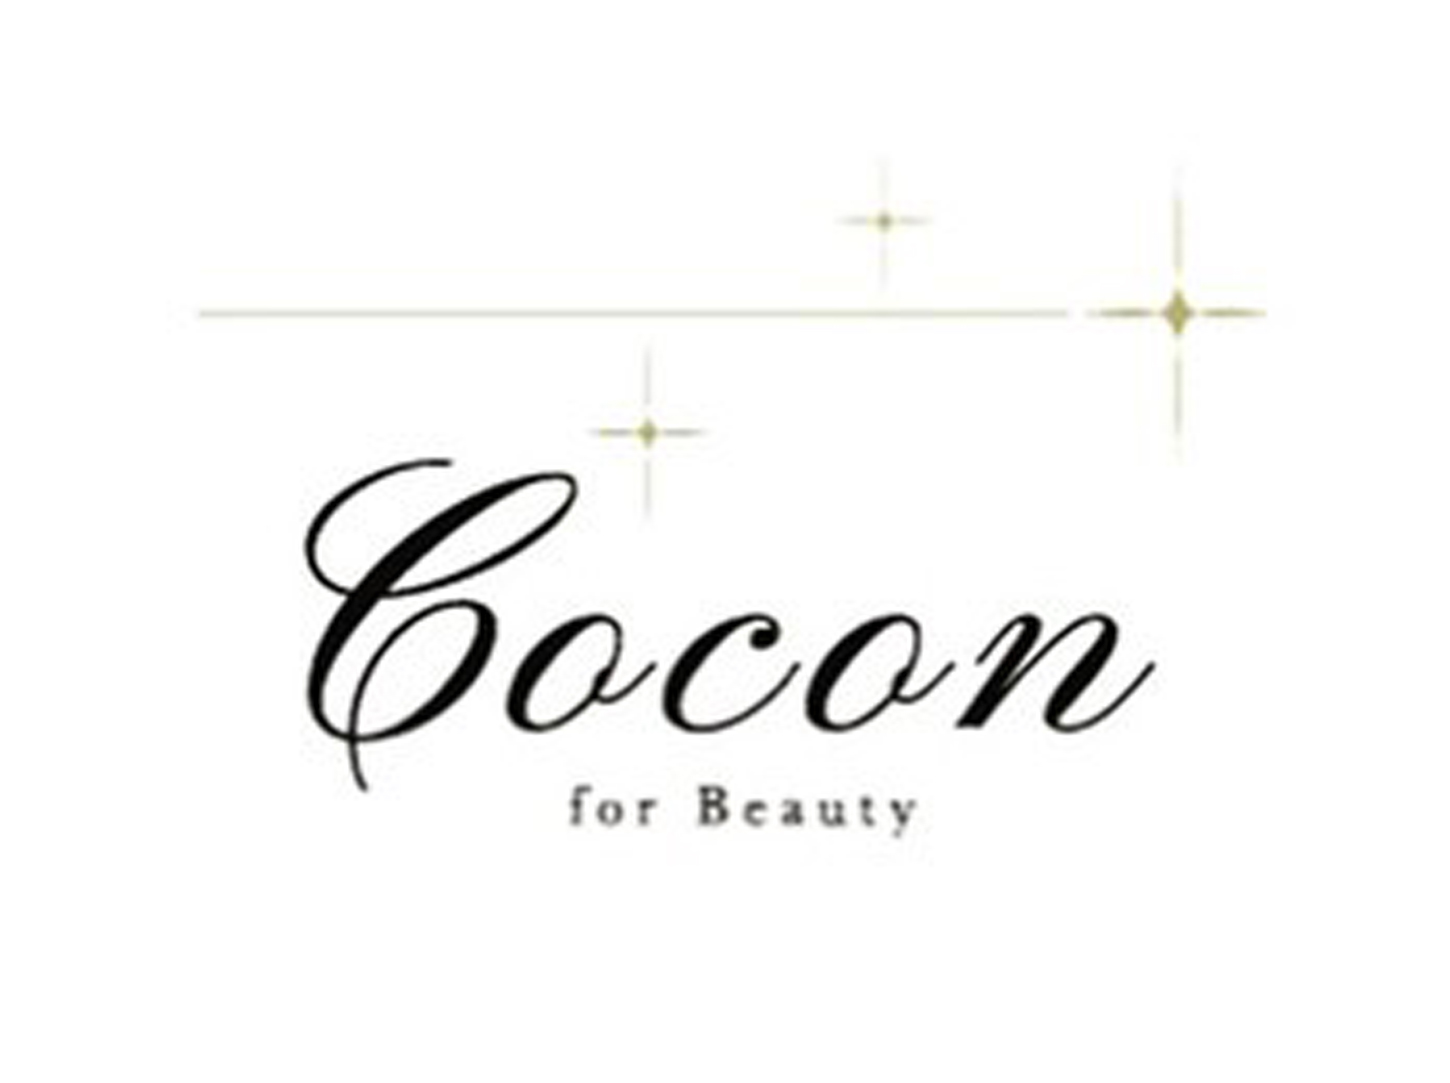 Cocon for beauty